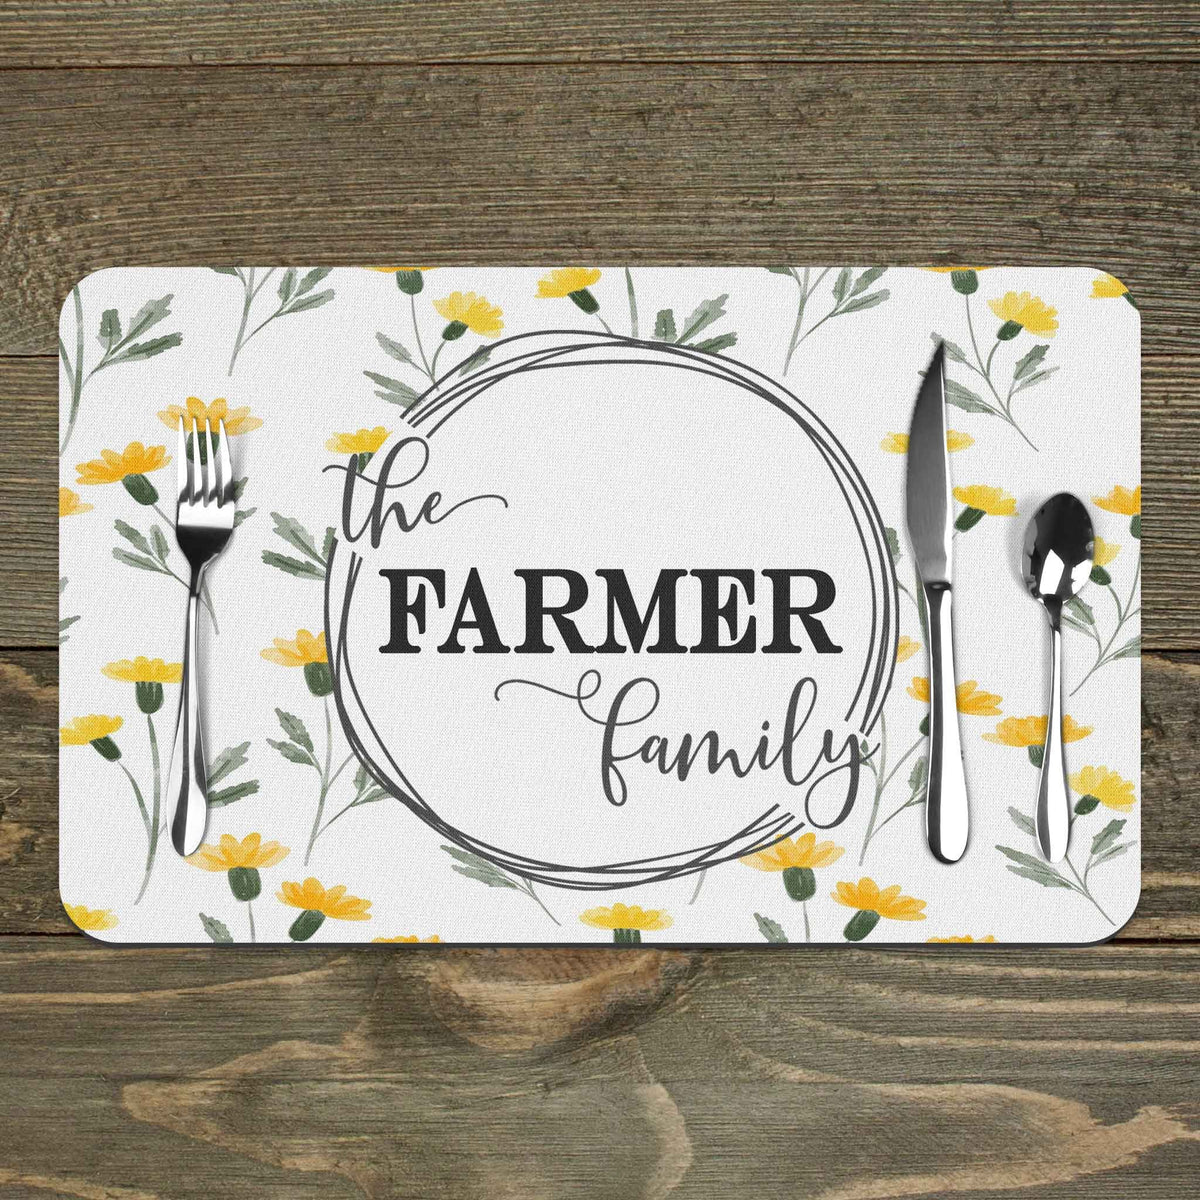 Custom Placemats | Personalized Dining and Serving | Yellow Watercolor Vine Wreath